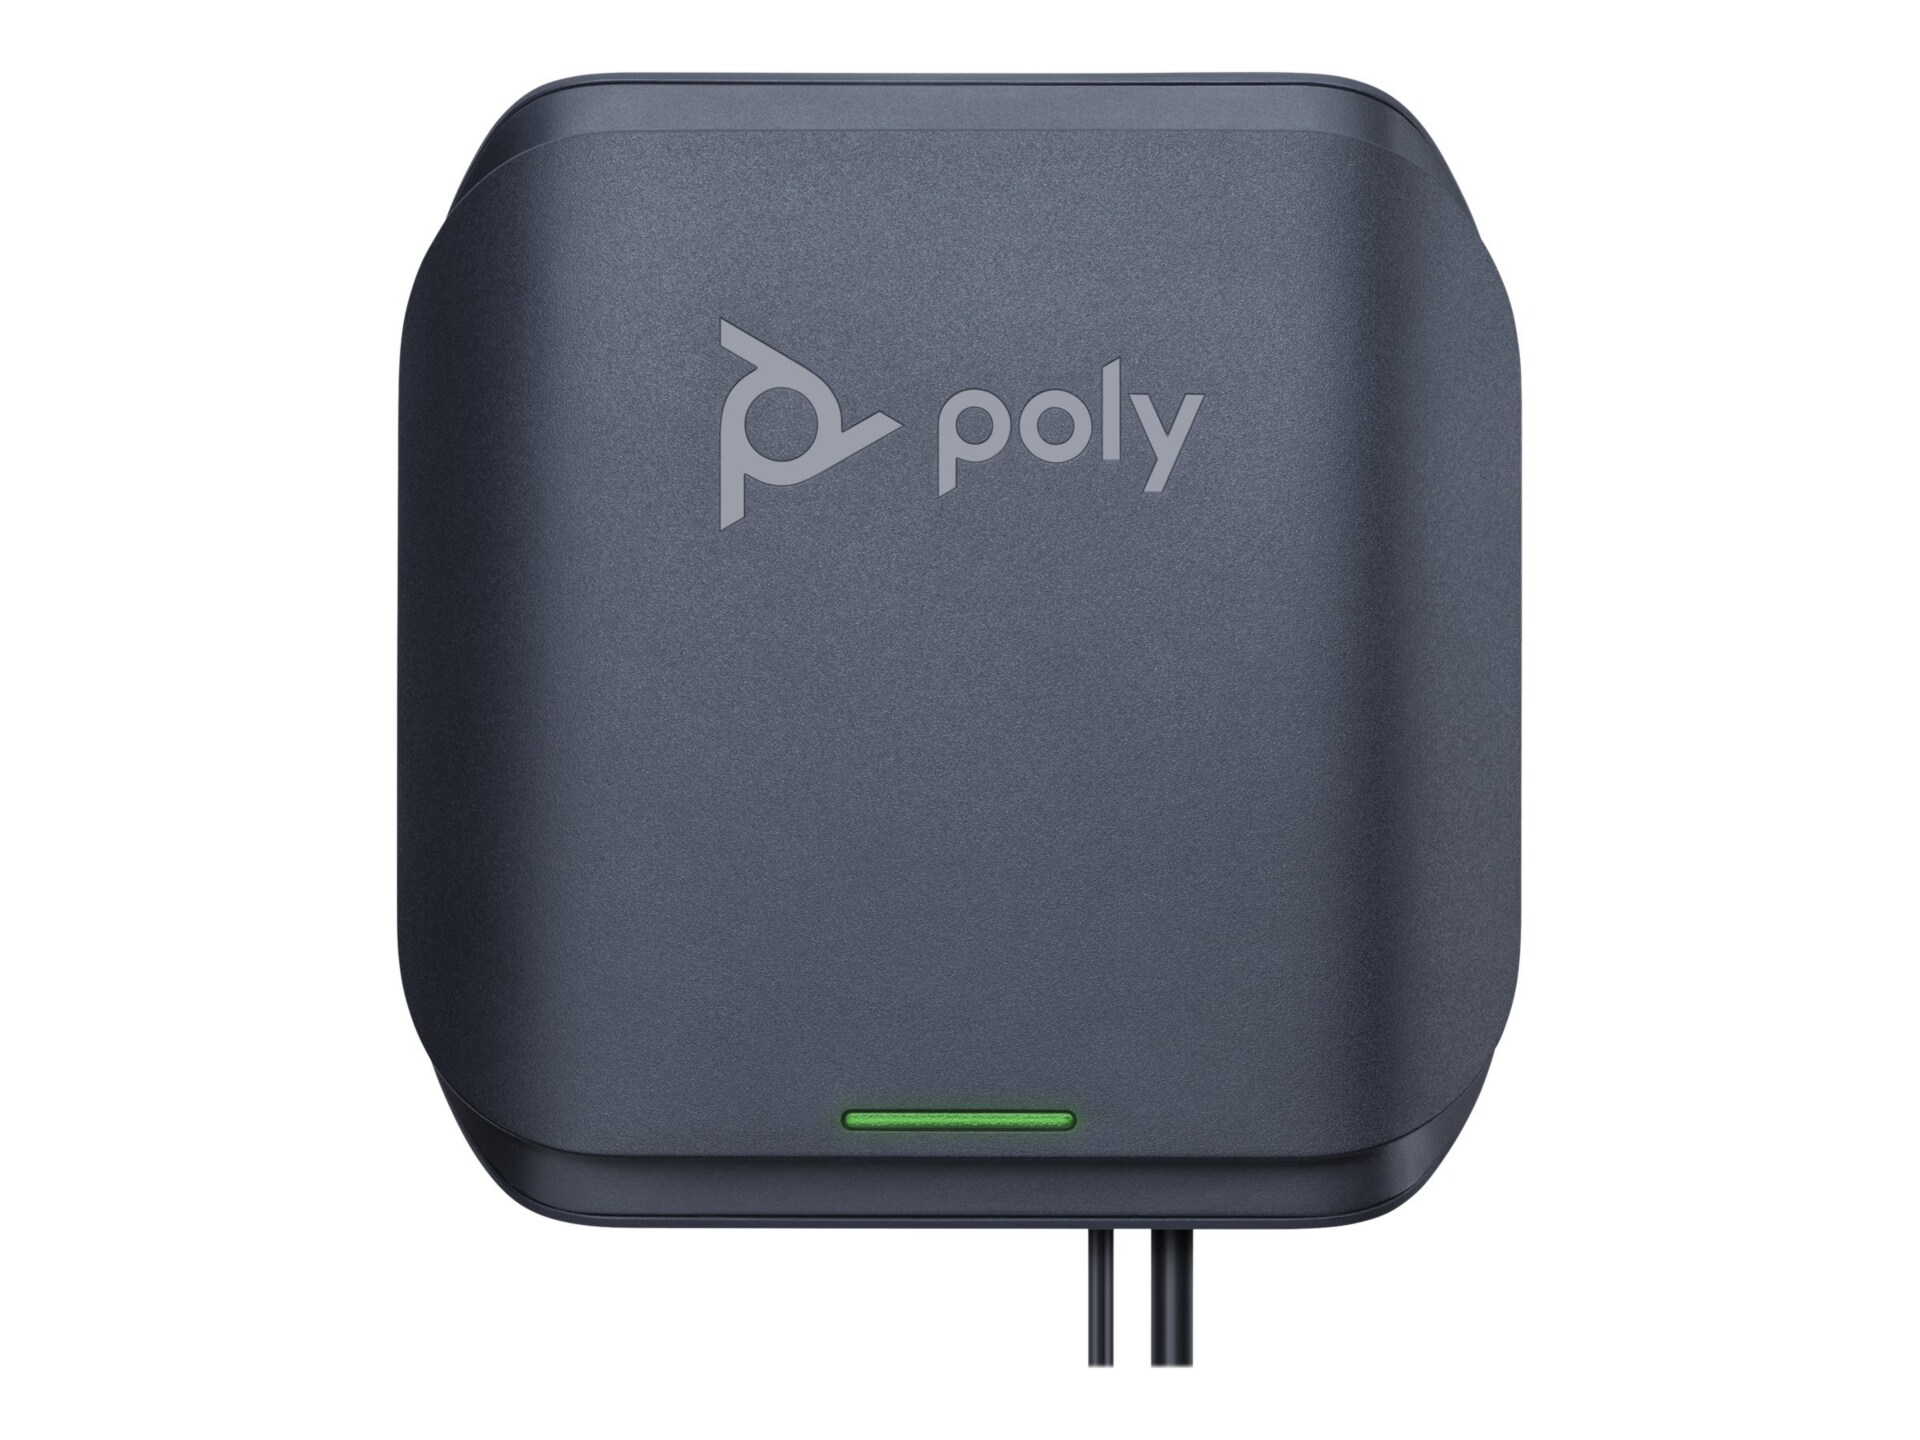 Poly Rove B4 - cordless phone base station / VoIP phone base station with caller ID/call waiting - 3-way call capability